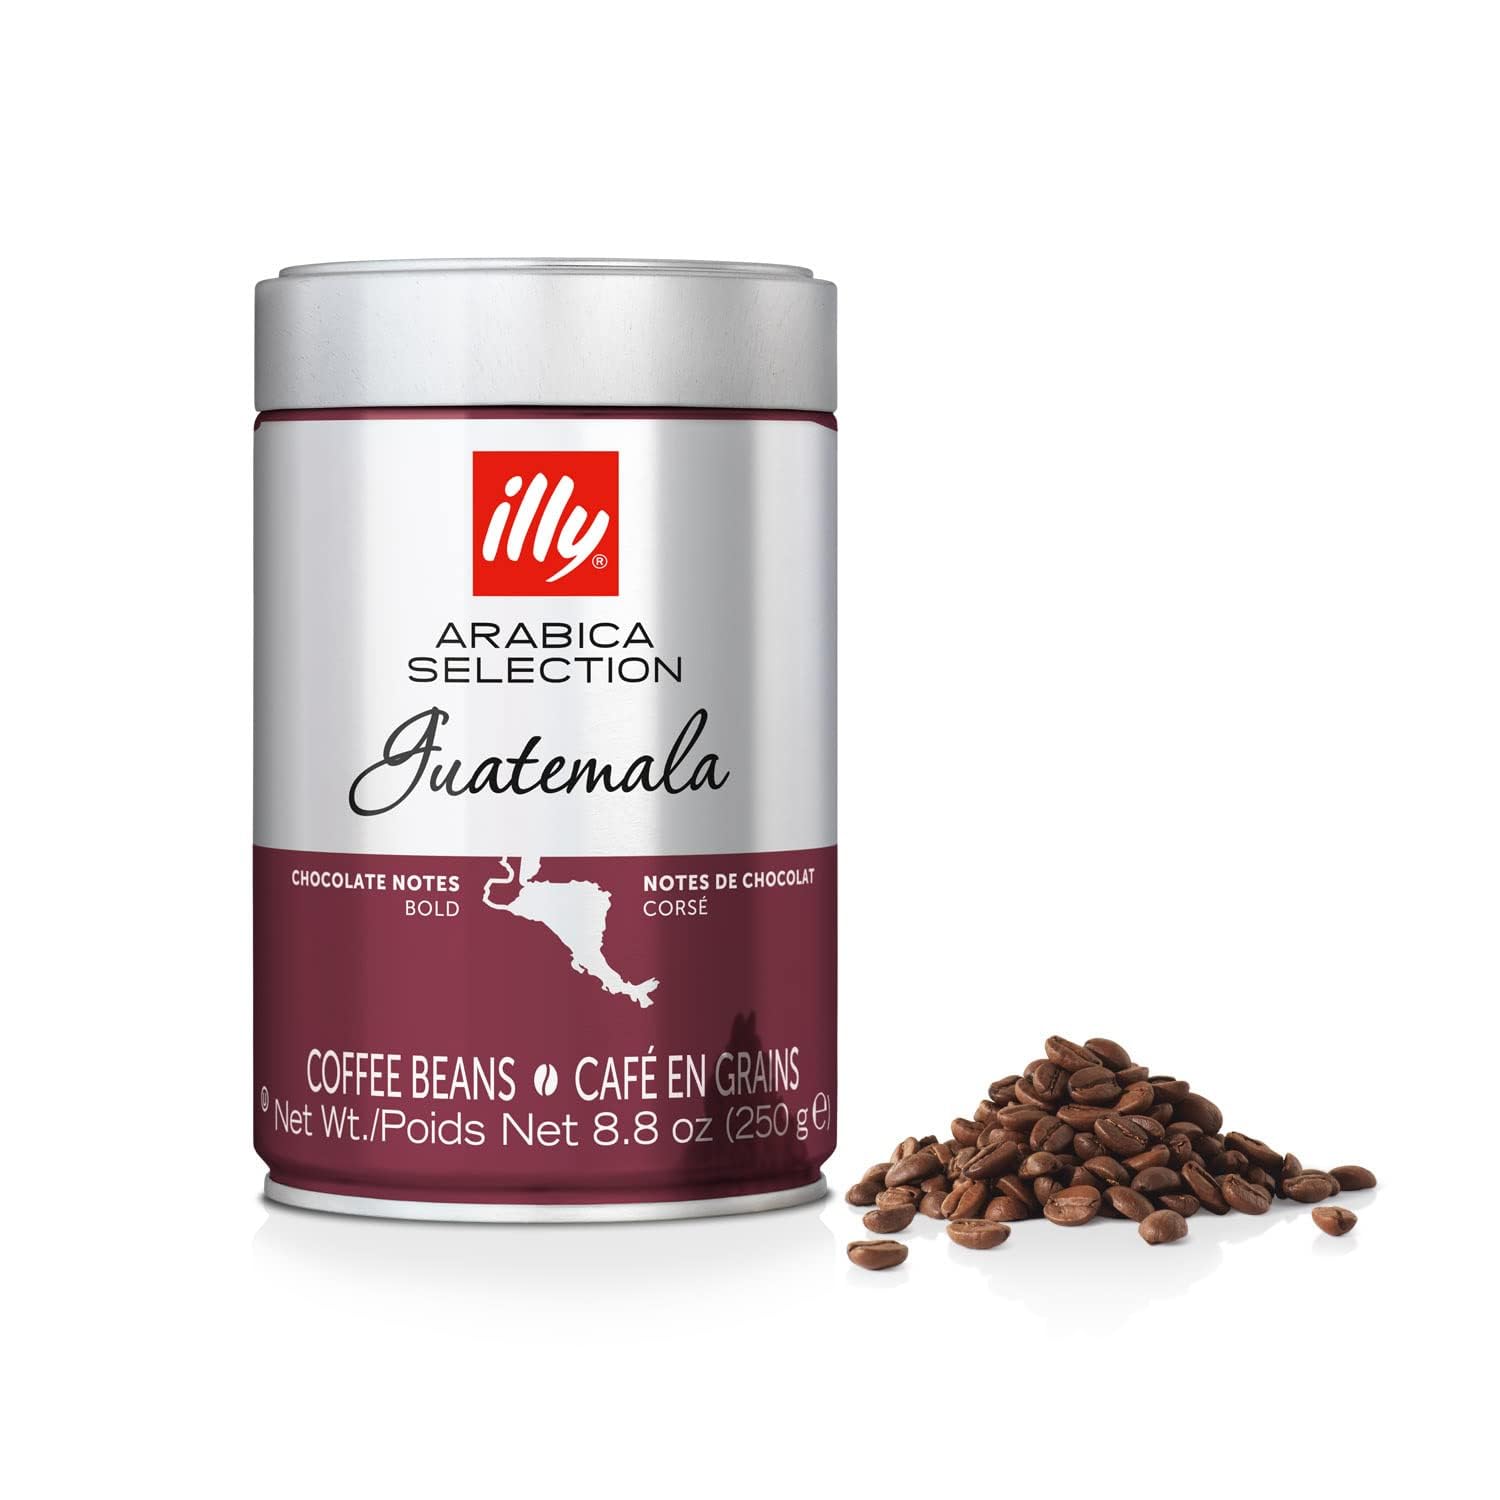 illy Coffee Beans Arabica Coffee Beans Selection Guatemala Pack of 6 (6 x 250 g)